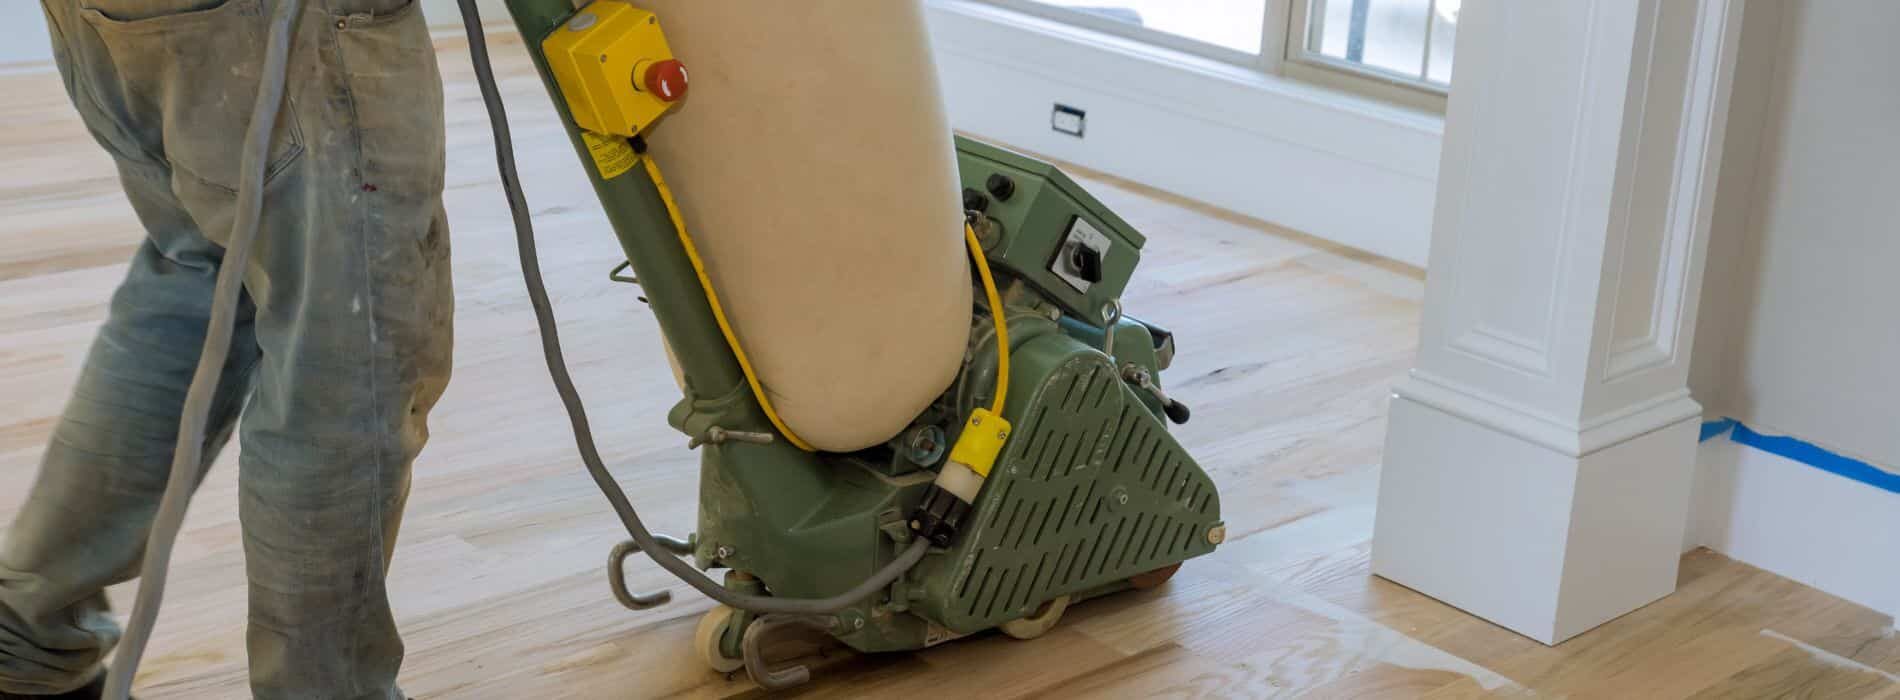 With the use of the versatile 1.5kW Bona Scorpion drum sander, Mr Sander® ensures effective sanding for herringbone floors in Belsize Park, NW3. Our innovative technique includes a HEPA-filtered dust extraction system, promoting a clean and efficient restoration process.